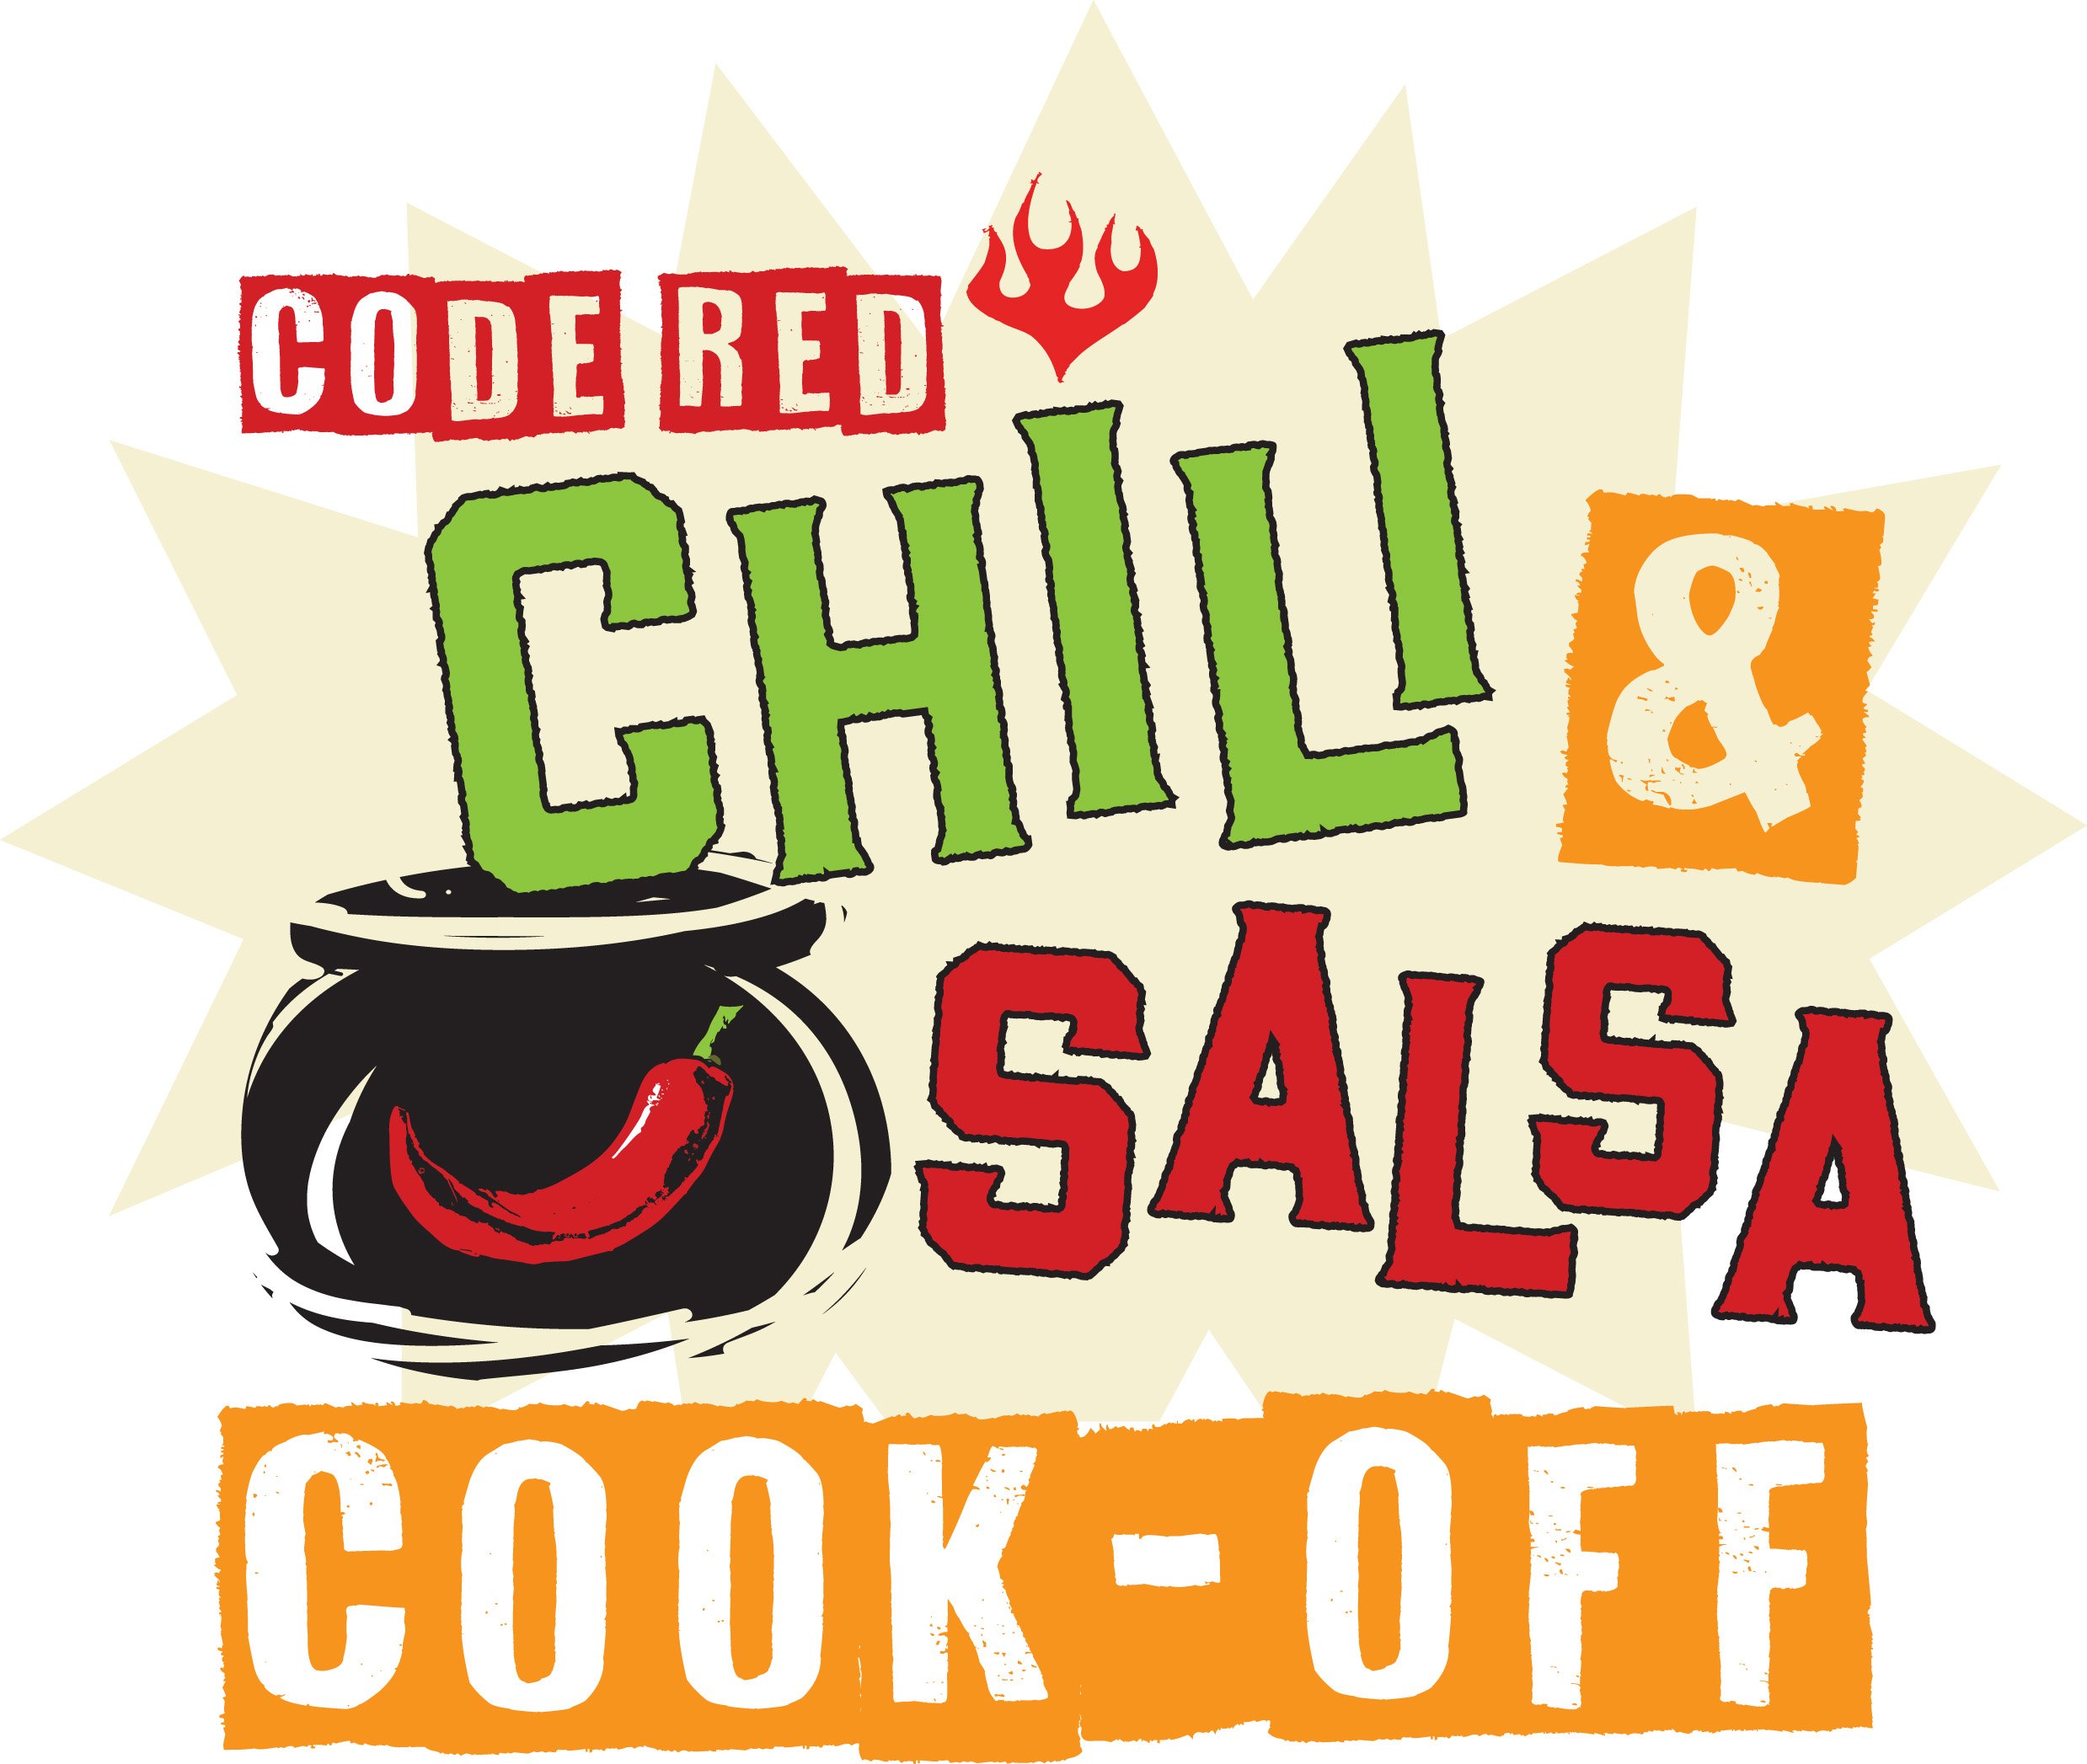 Plan to Attend the 8th Annual Code Red Chili Cook-Off